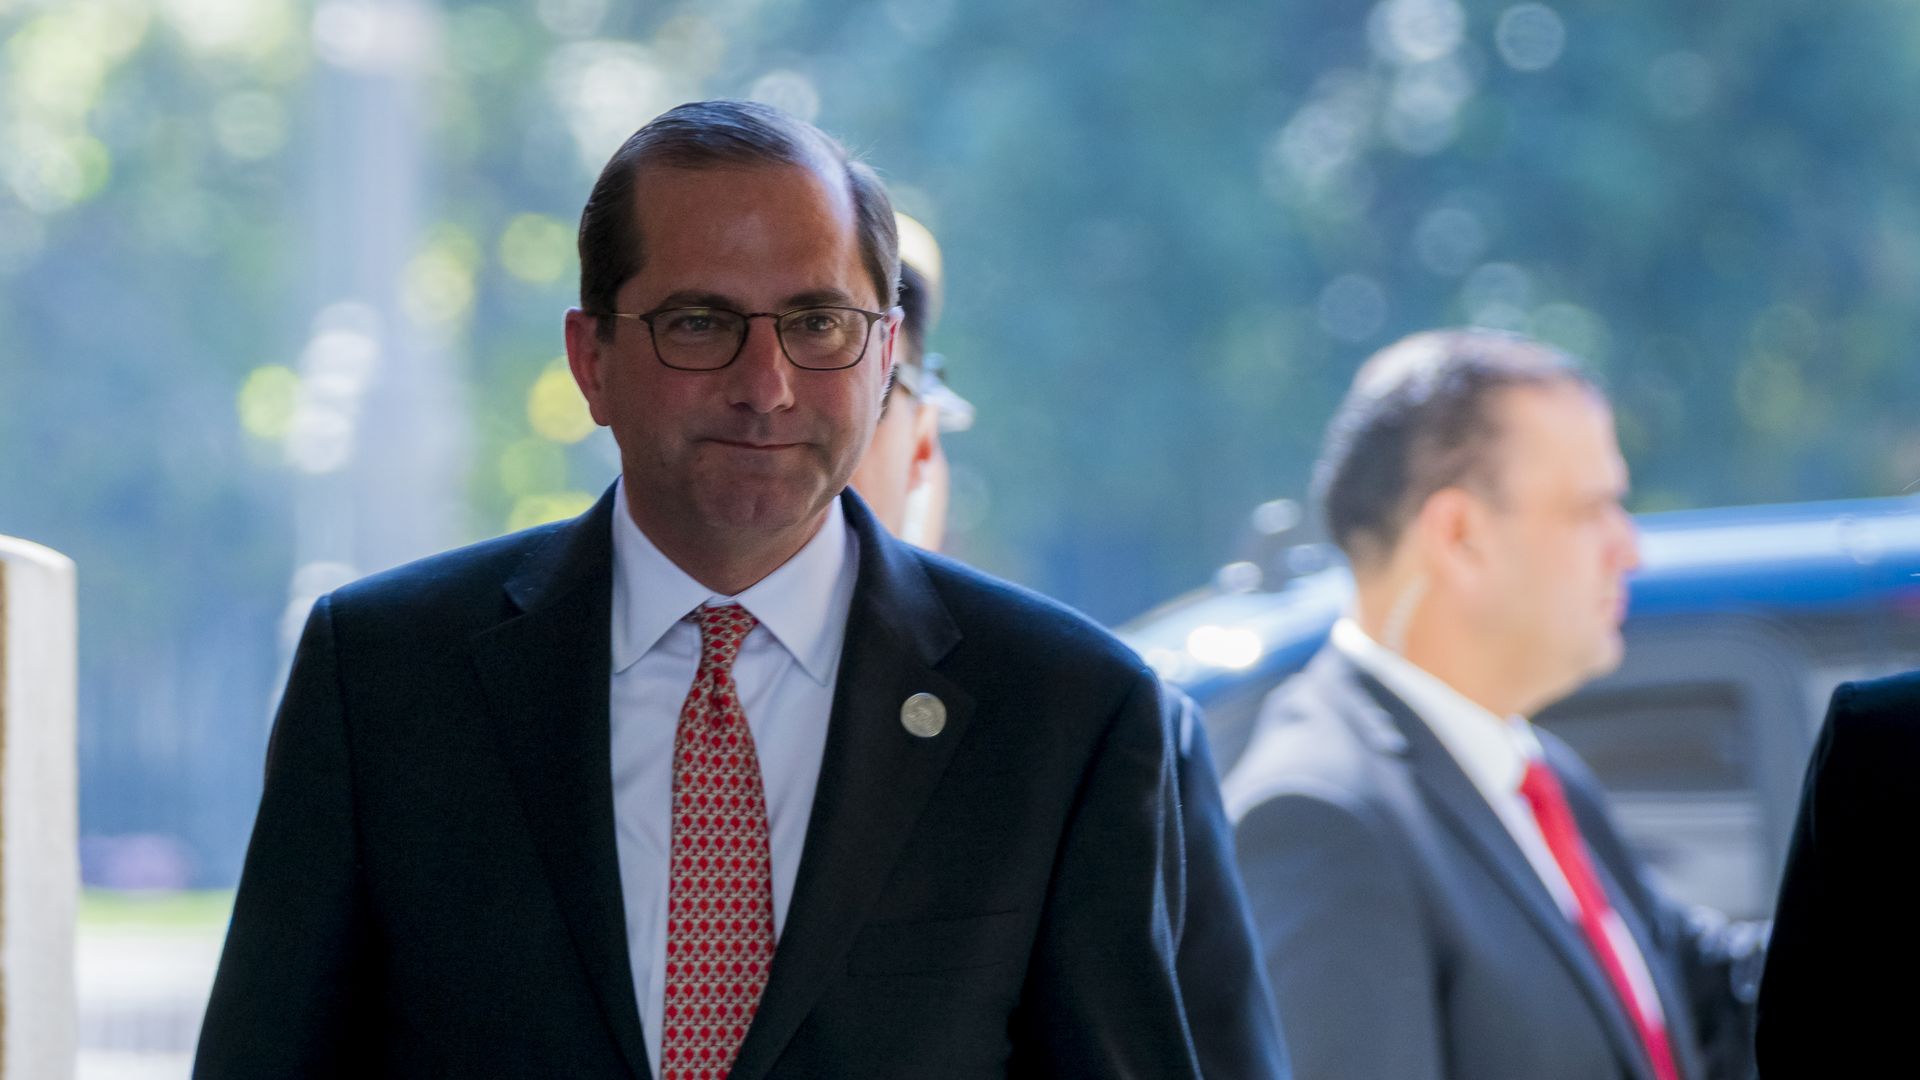 HHS Secretary Alex Azar, walking, with an expression that appears confident.